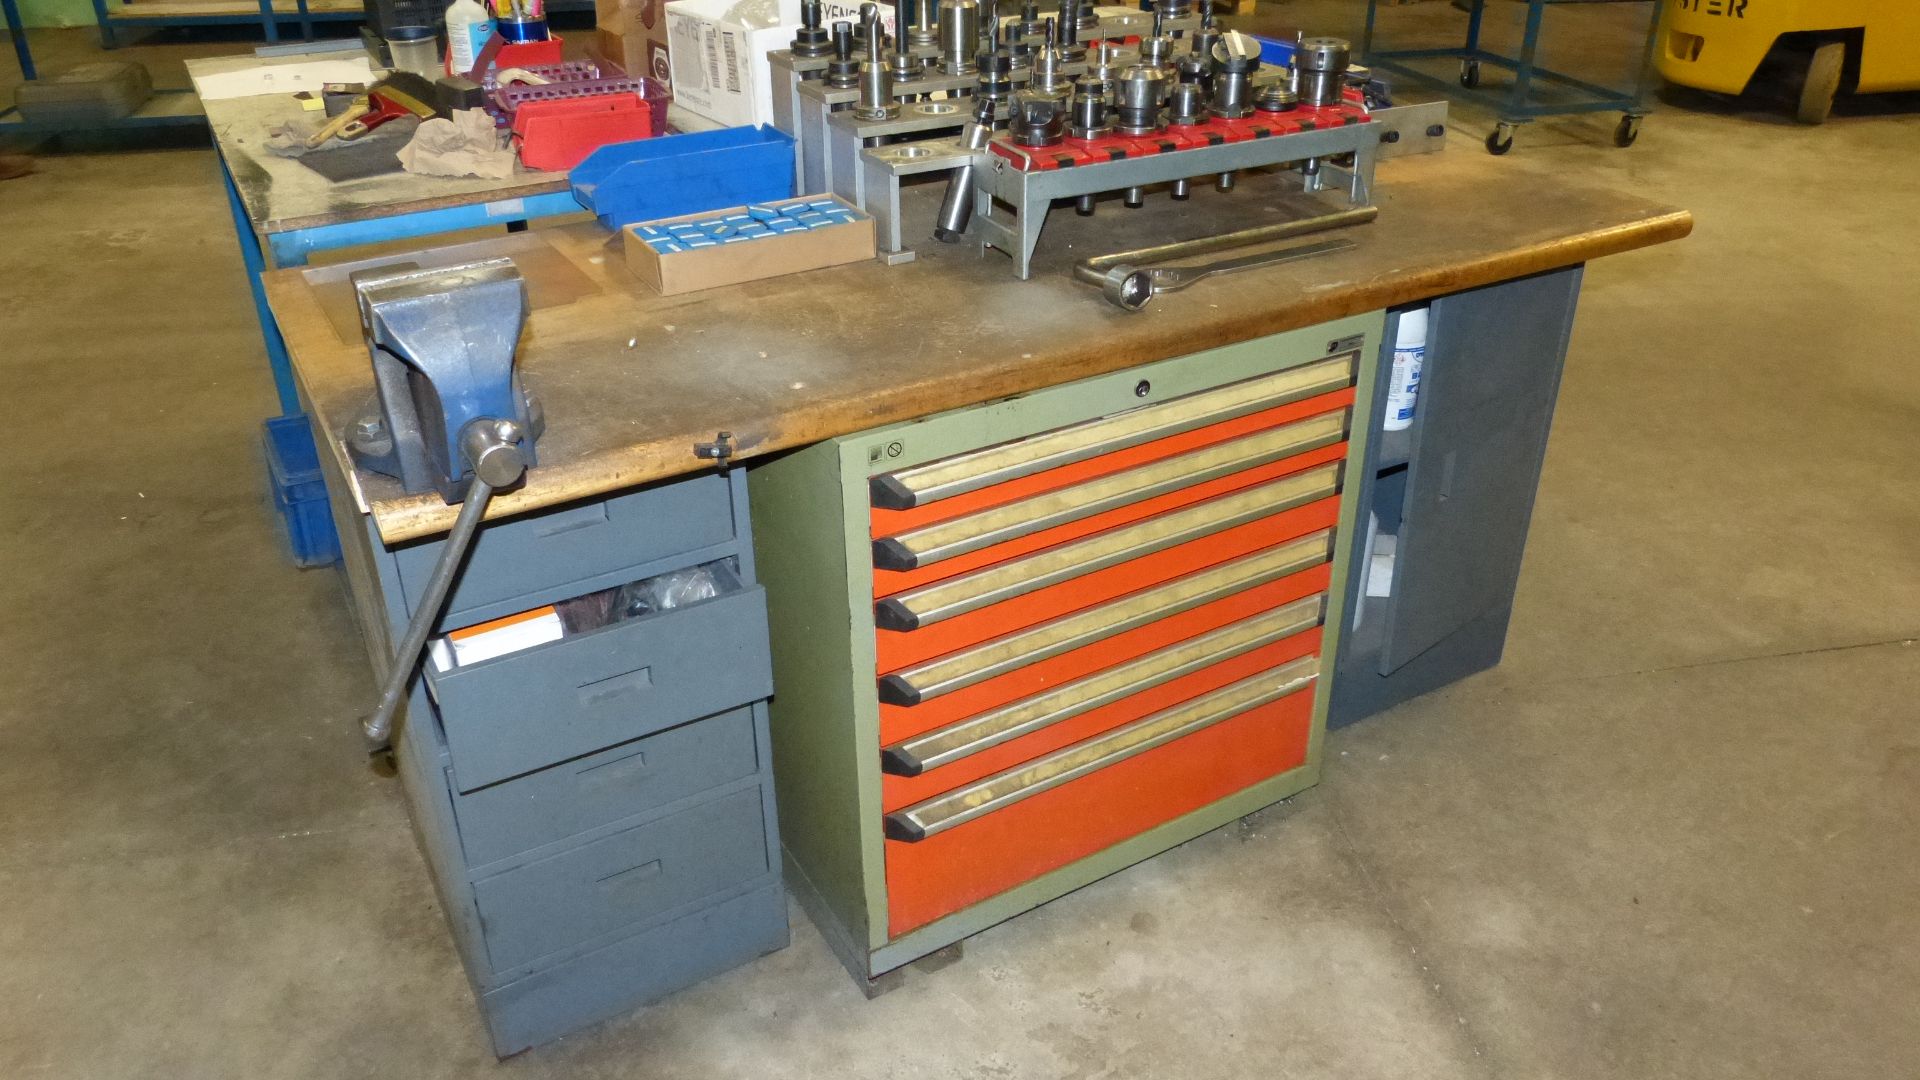 WOOD TOP SHOP TABLE W/METAL BASE, CABINETS, AND VISE (GREEN/ORANGE CABINET NOT INCLUDED)